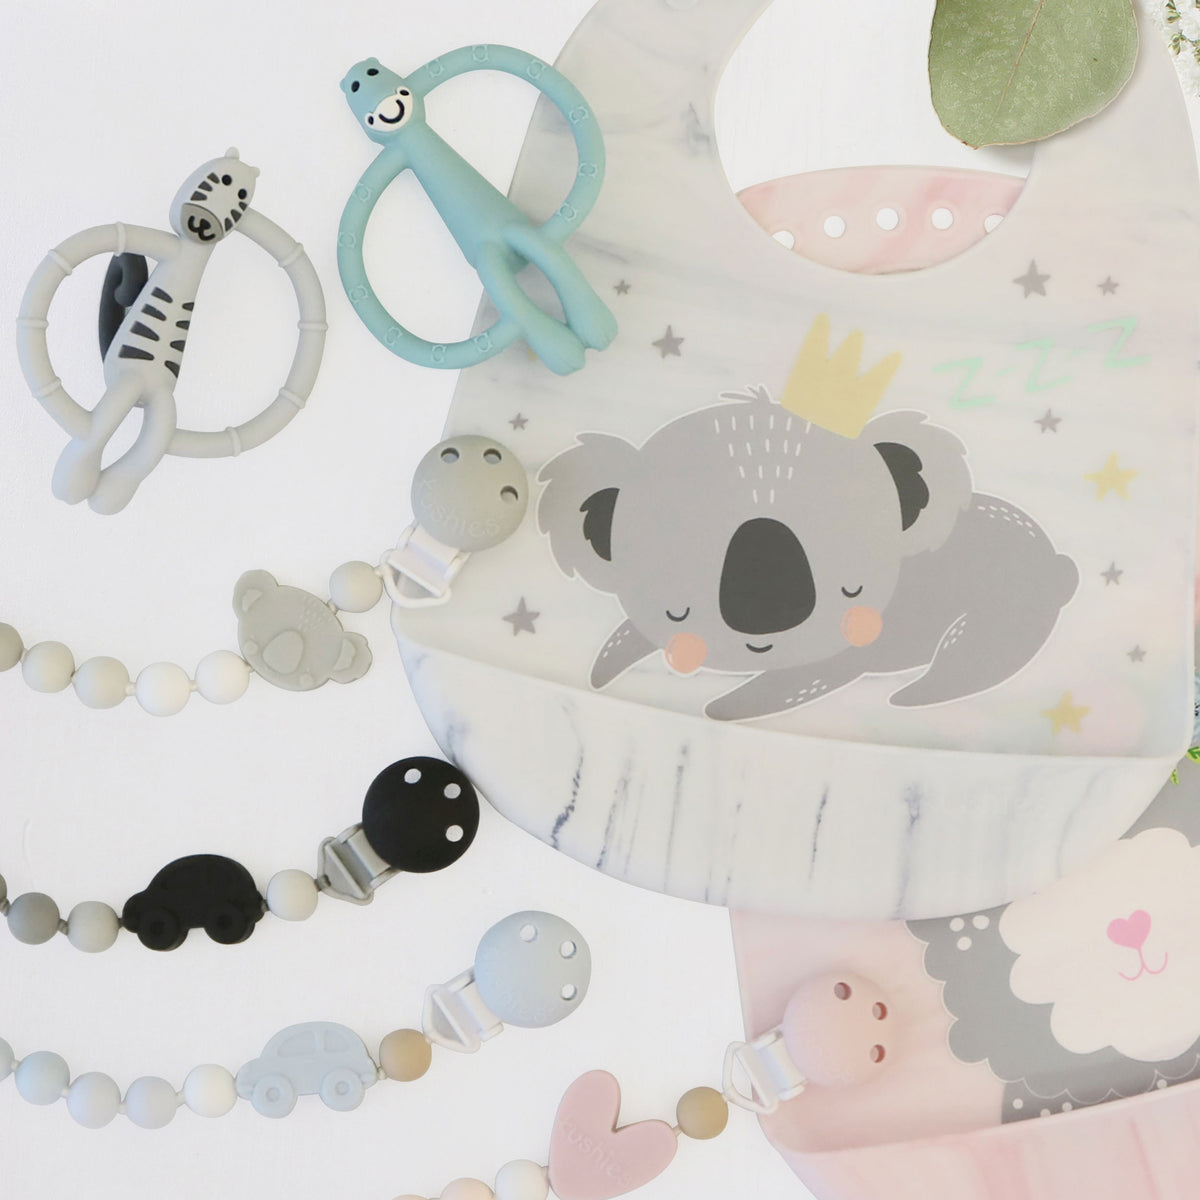 silicone bibs with pacifier clips and teething toys on table